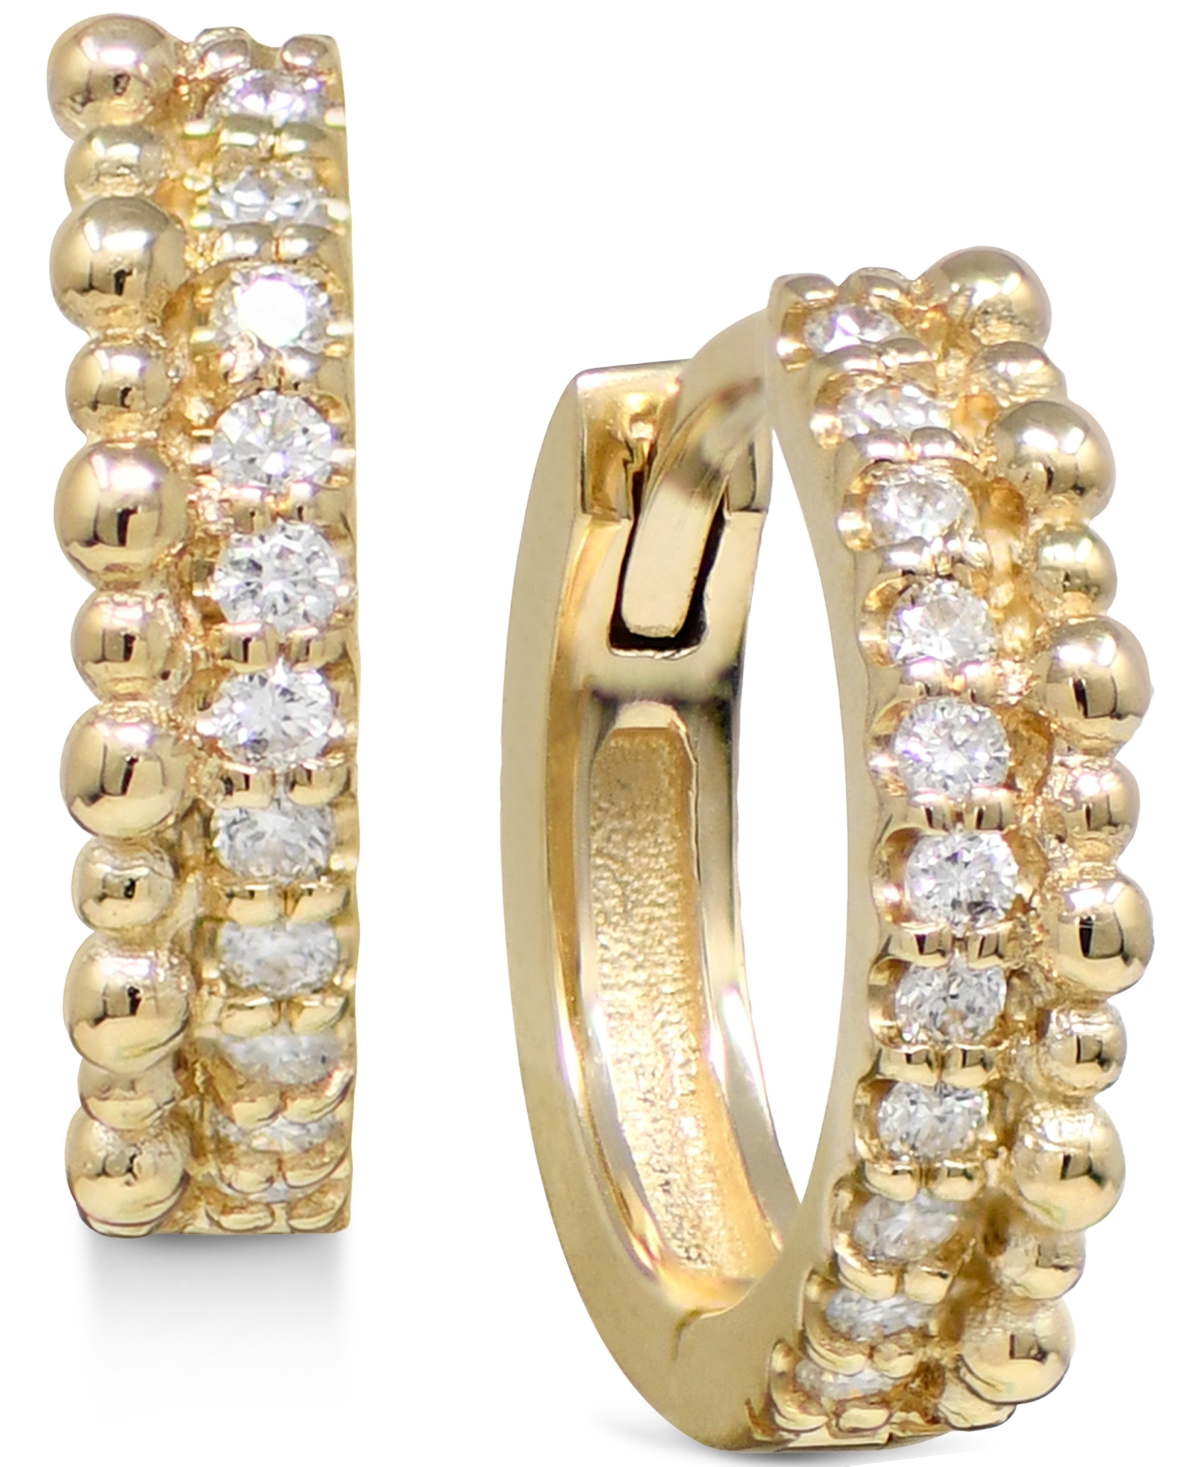 Diamond Pave & Bead Extra Small Hoop Earrings (1/6 ct. t.w.) in 14k Gold, 0.47" - Gold